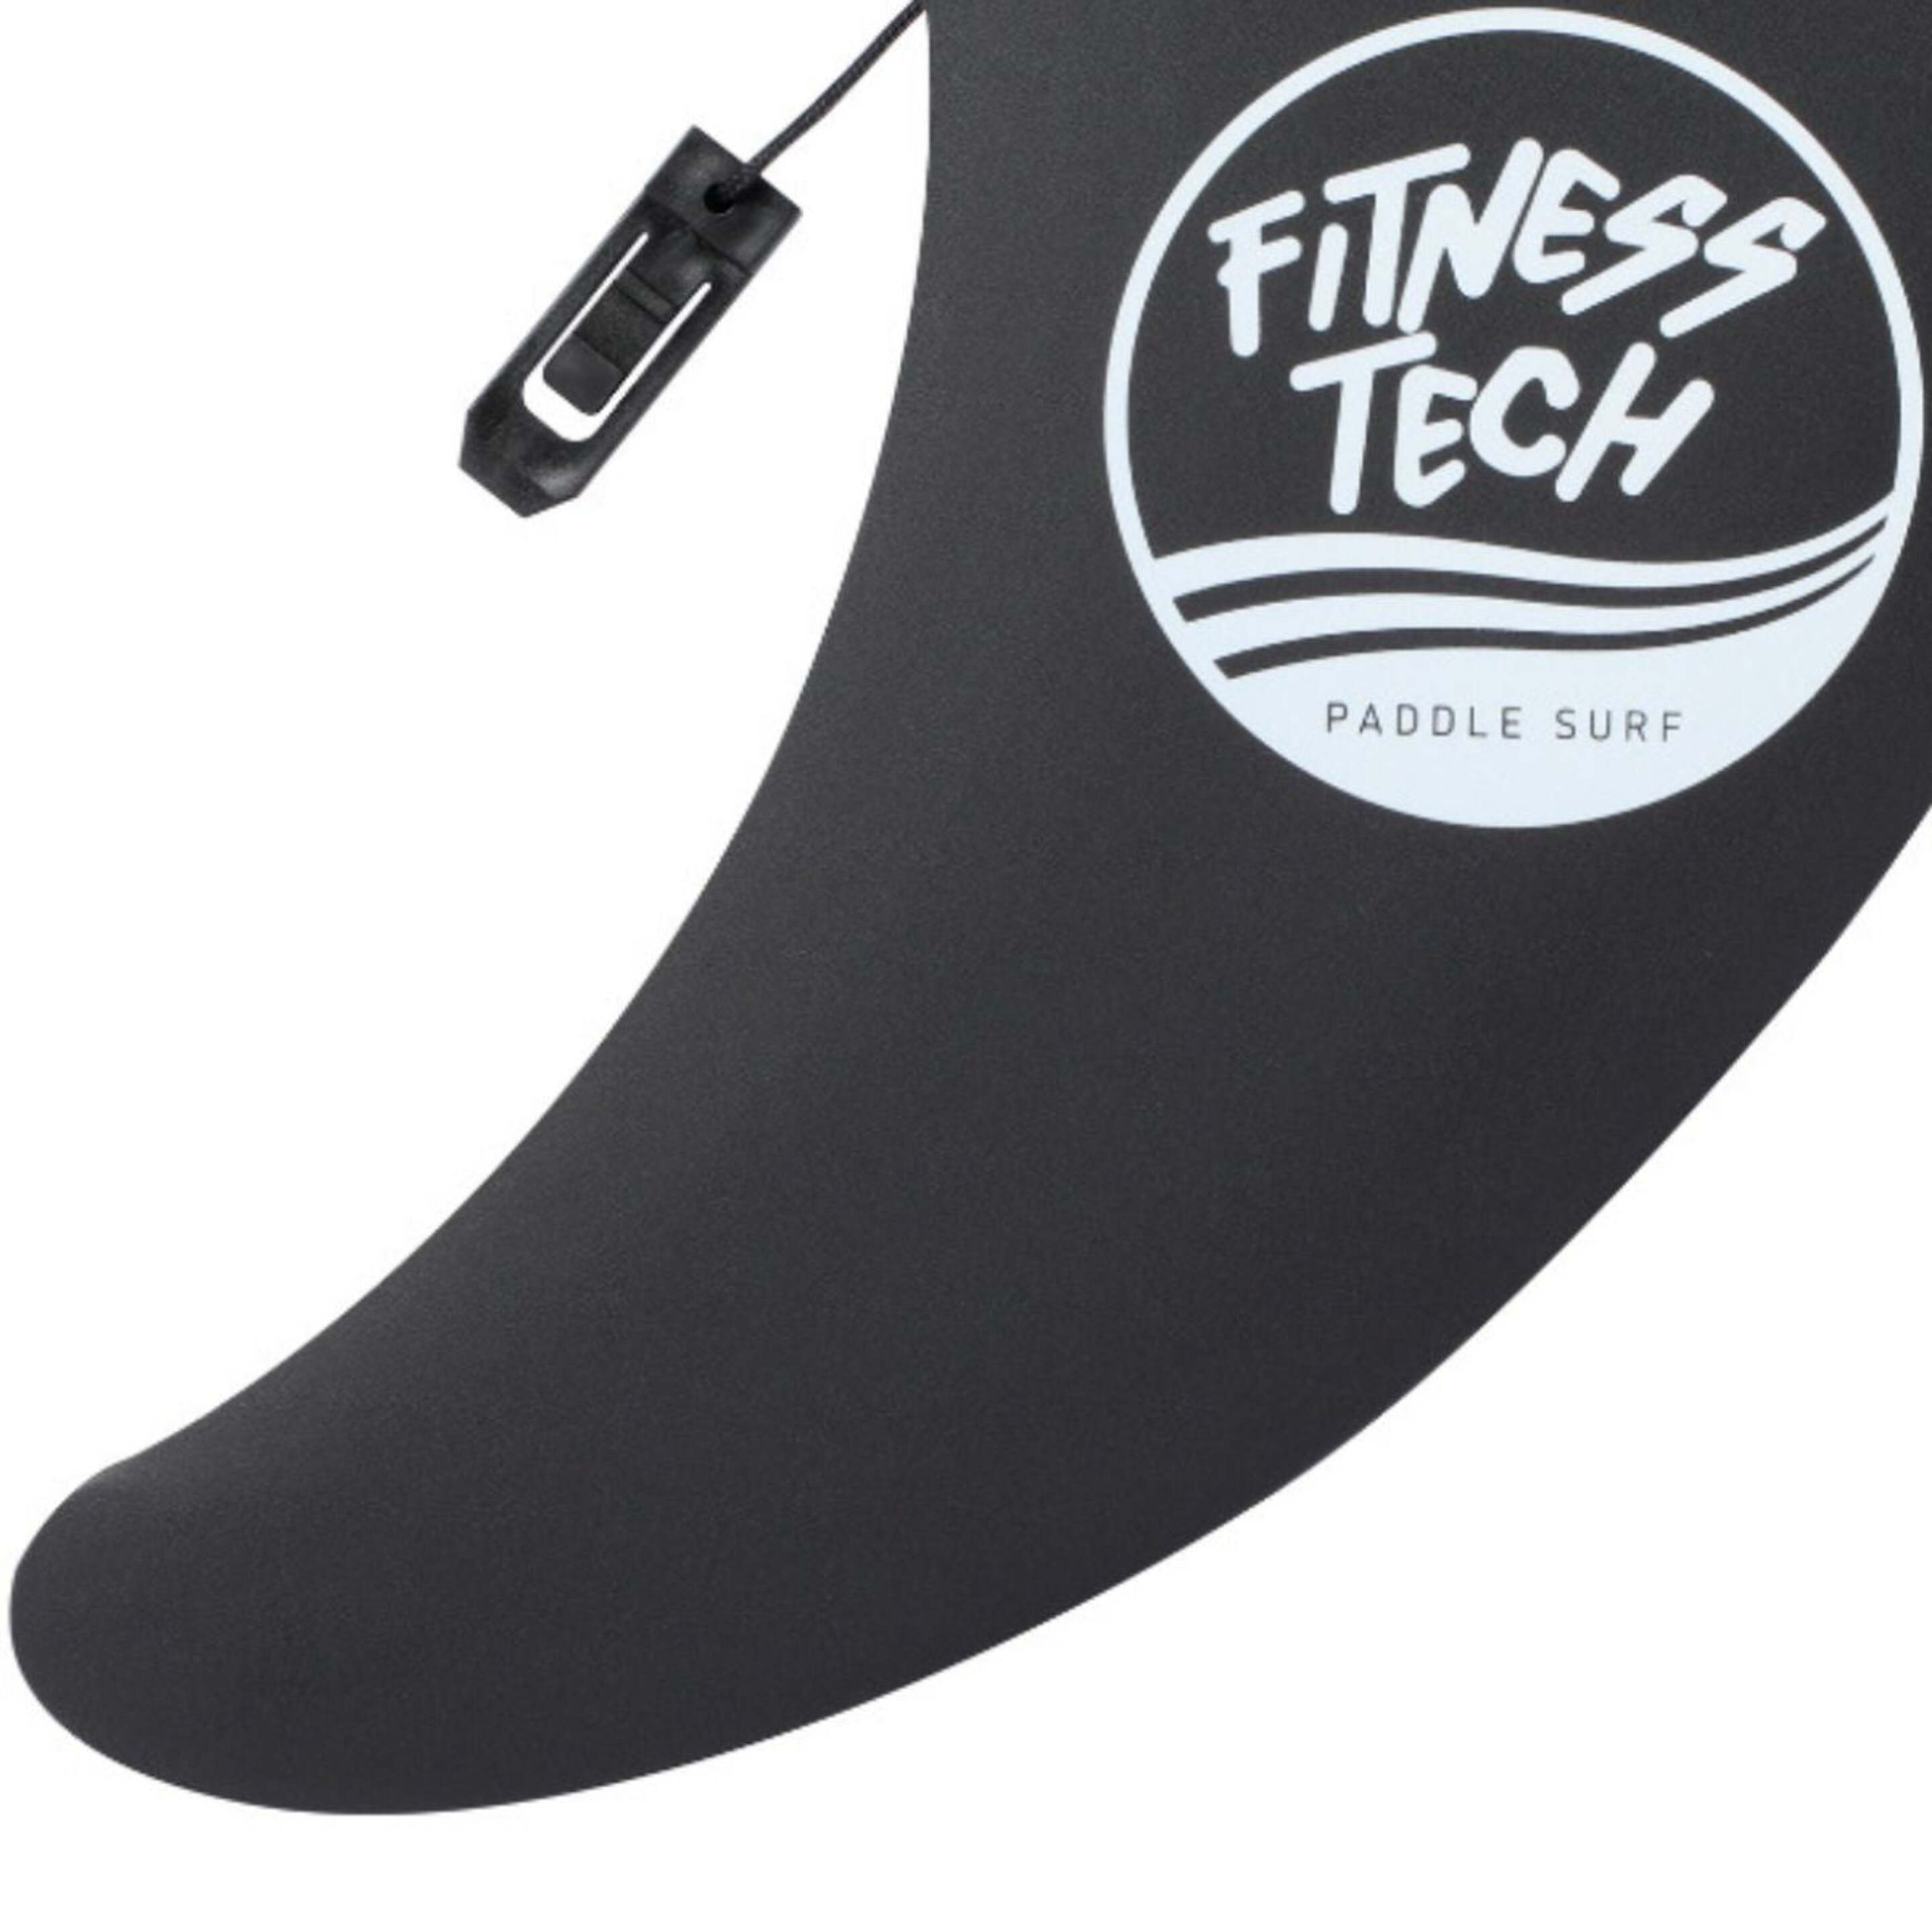 Quilla Fitness Tech Paddle Surf - Negro - Quilla Fitness Tech Paddle Surf  MKP